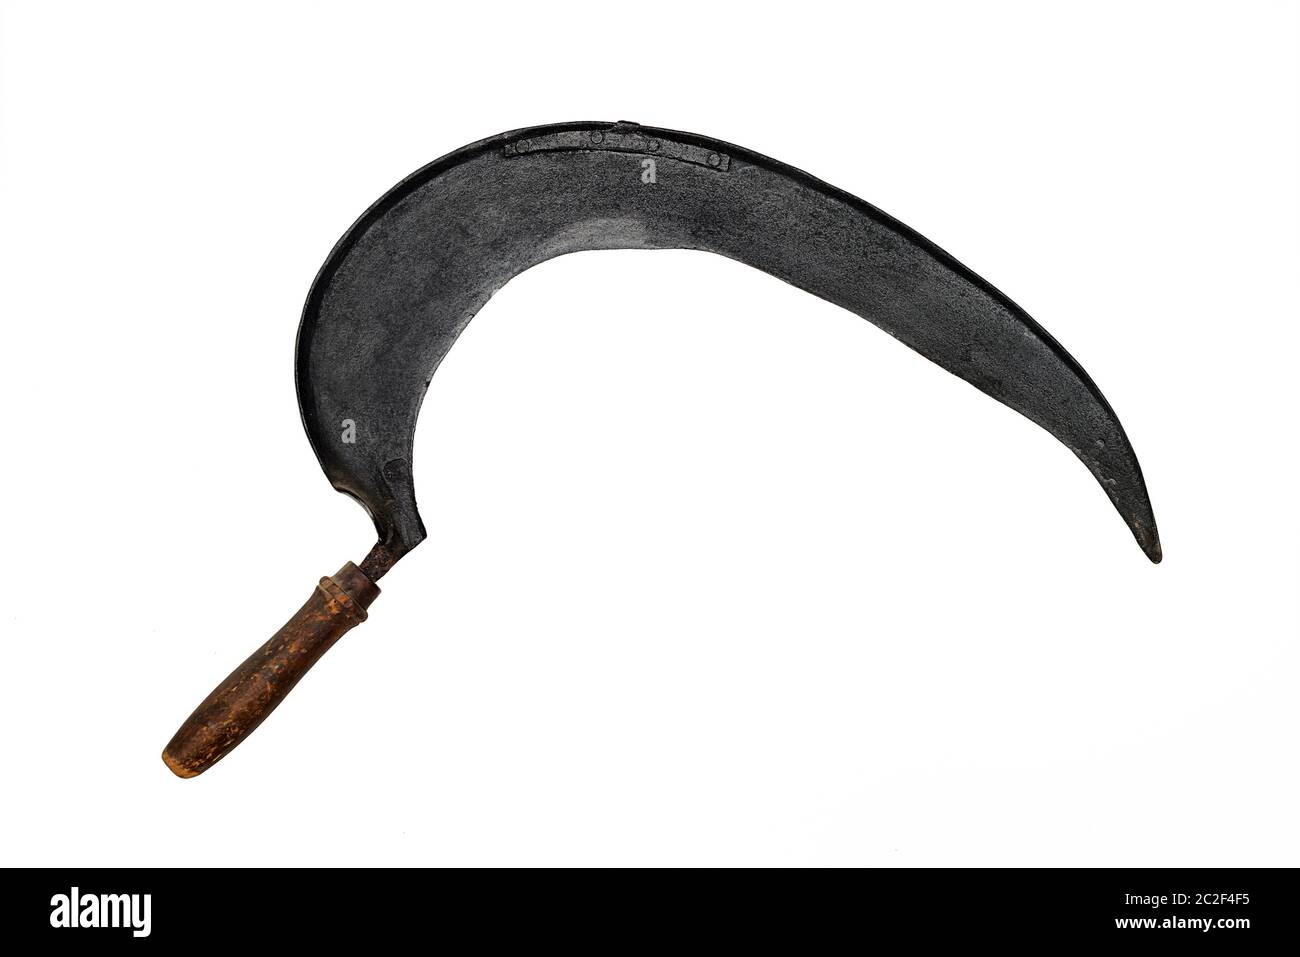 ancient hand made sickle on white background Stock Photo